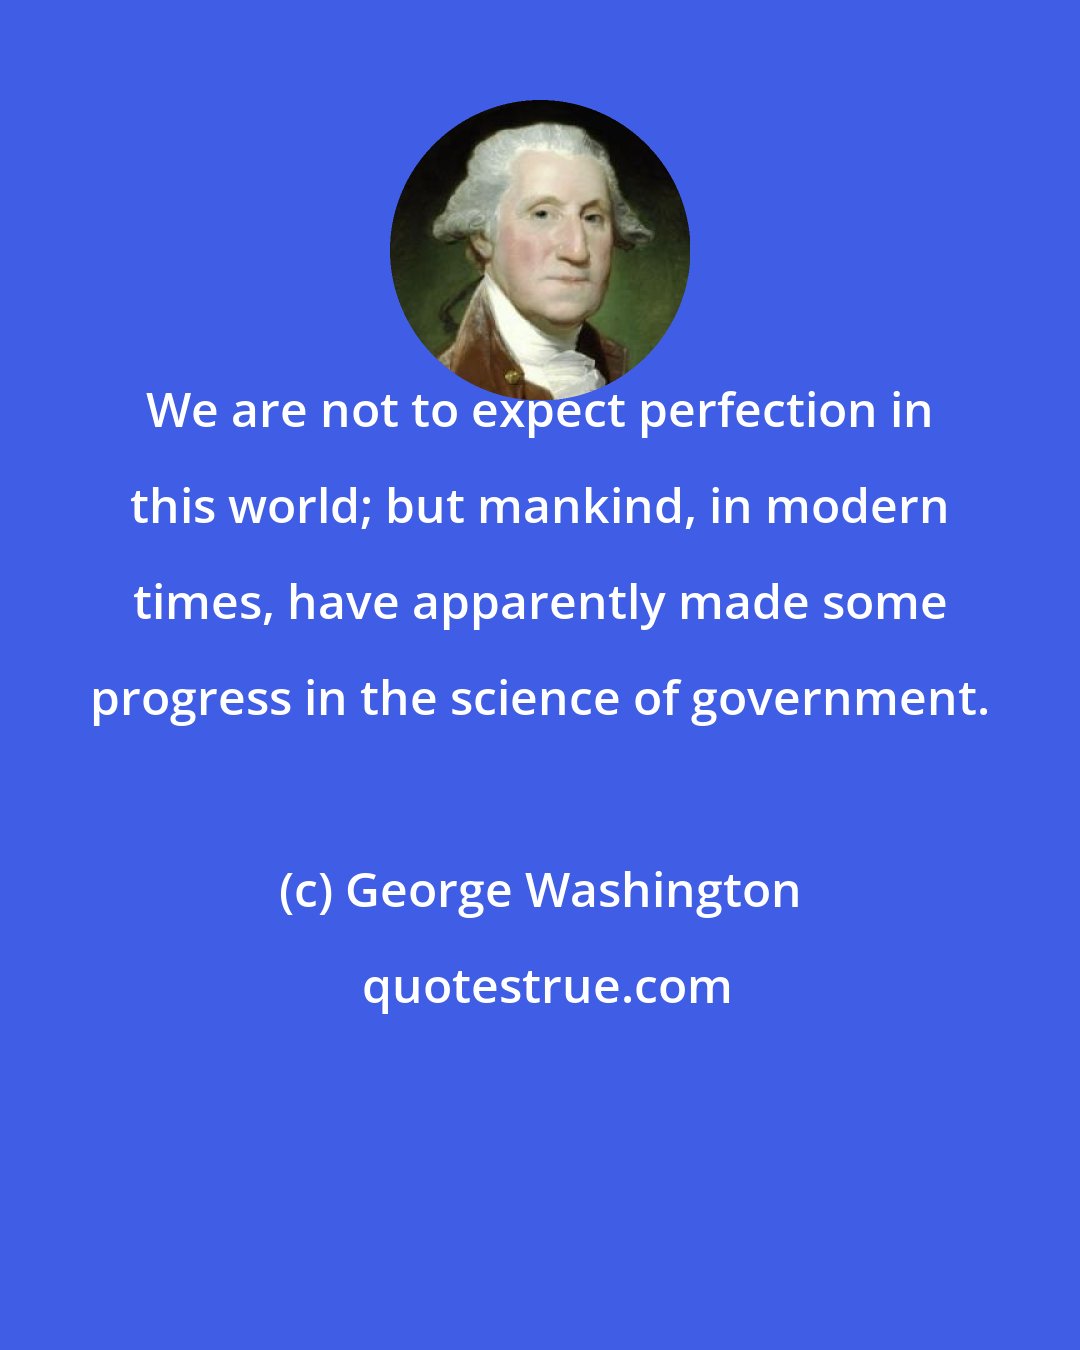 George Washington: We are not to expect perfection in this world; but mankind, in modern times, have apparently made some progress in the science of government.